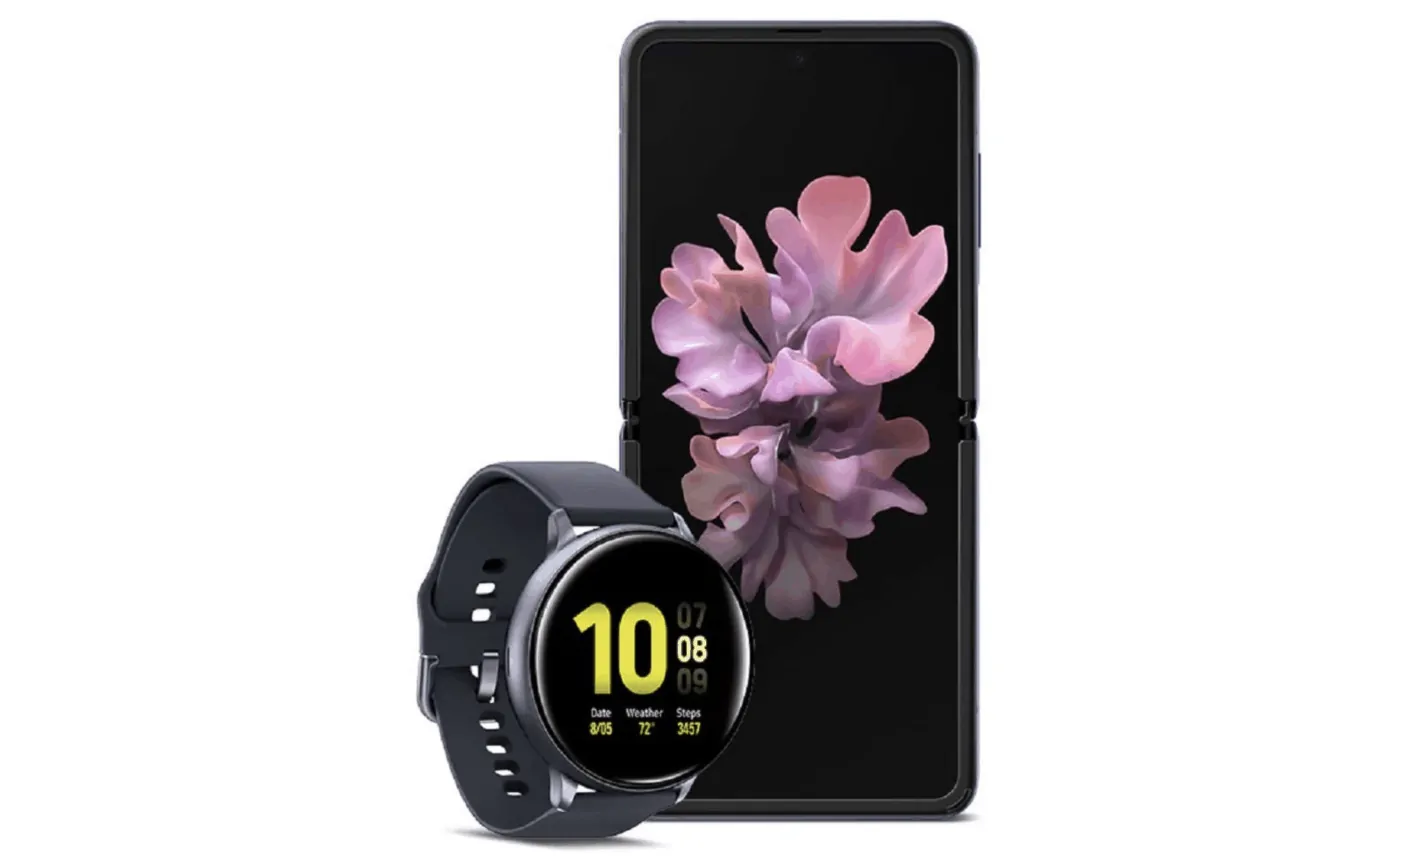 Featured image for The Samsung Galaxy Z Flip & Galaxy S20 Now Include A Free Galaxy Watch Active 2